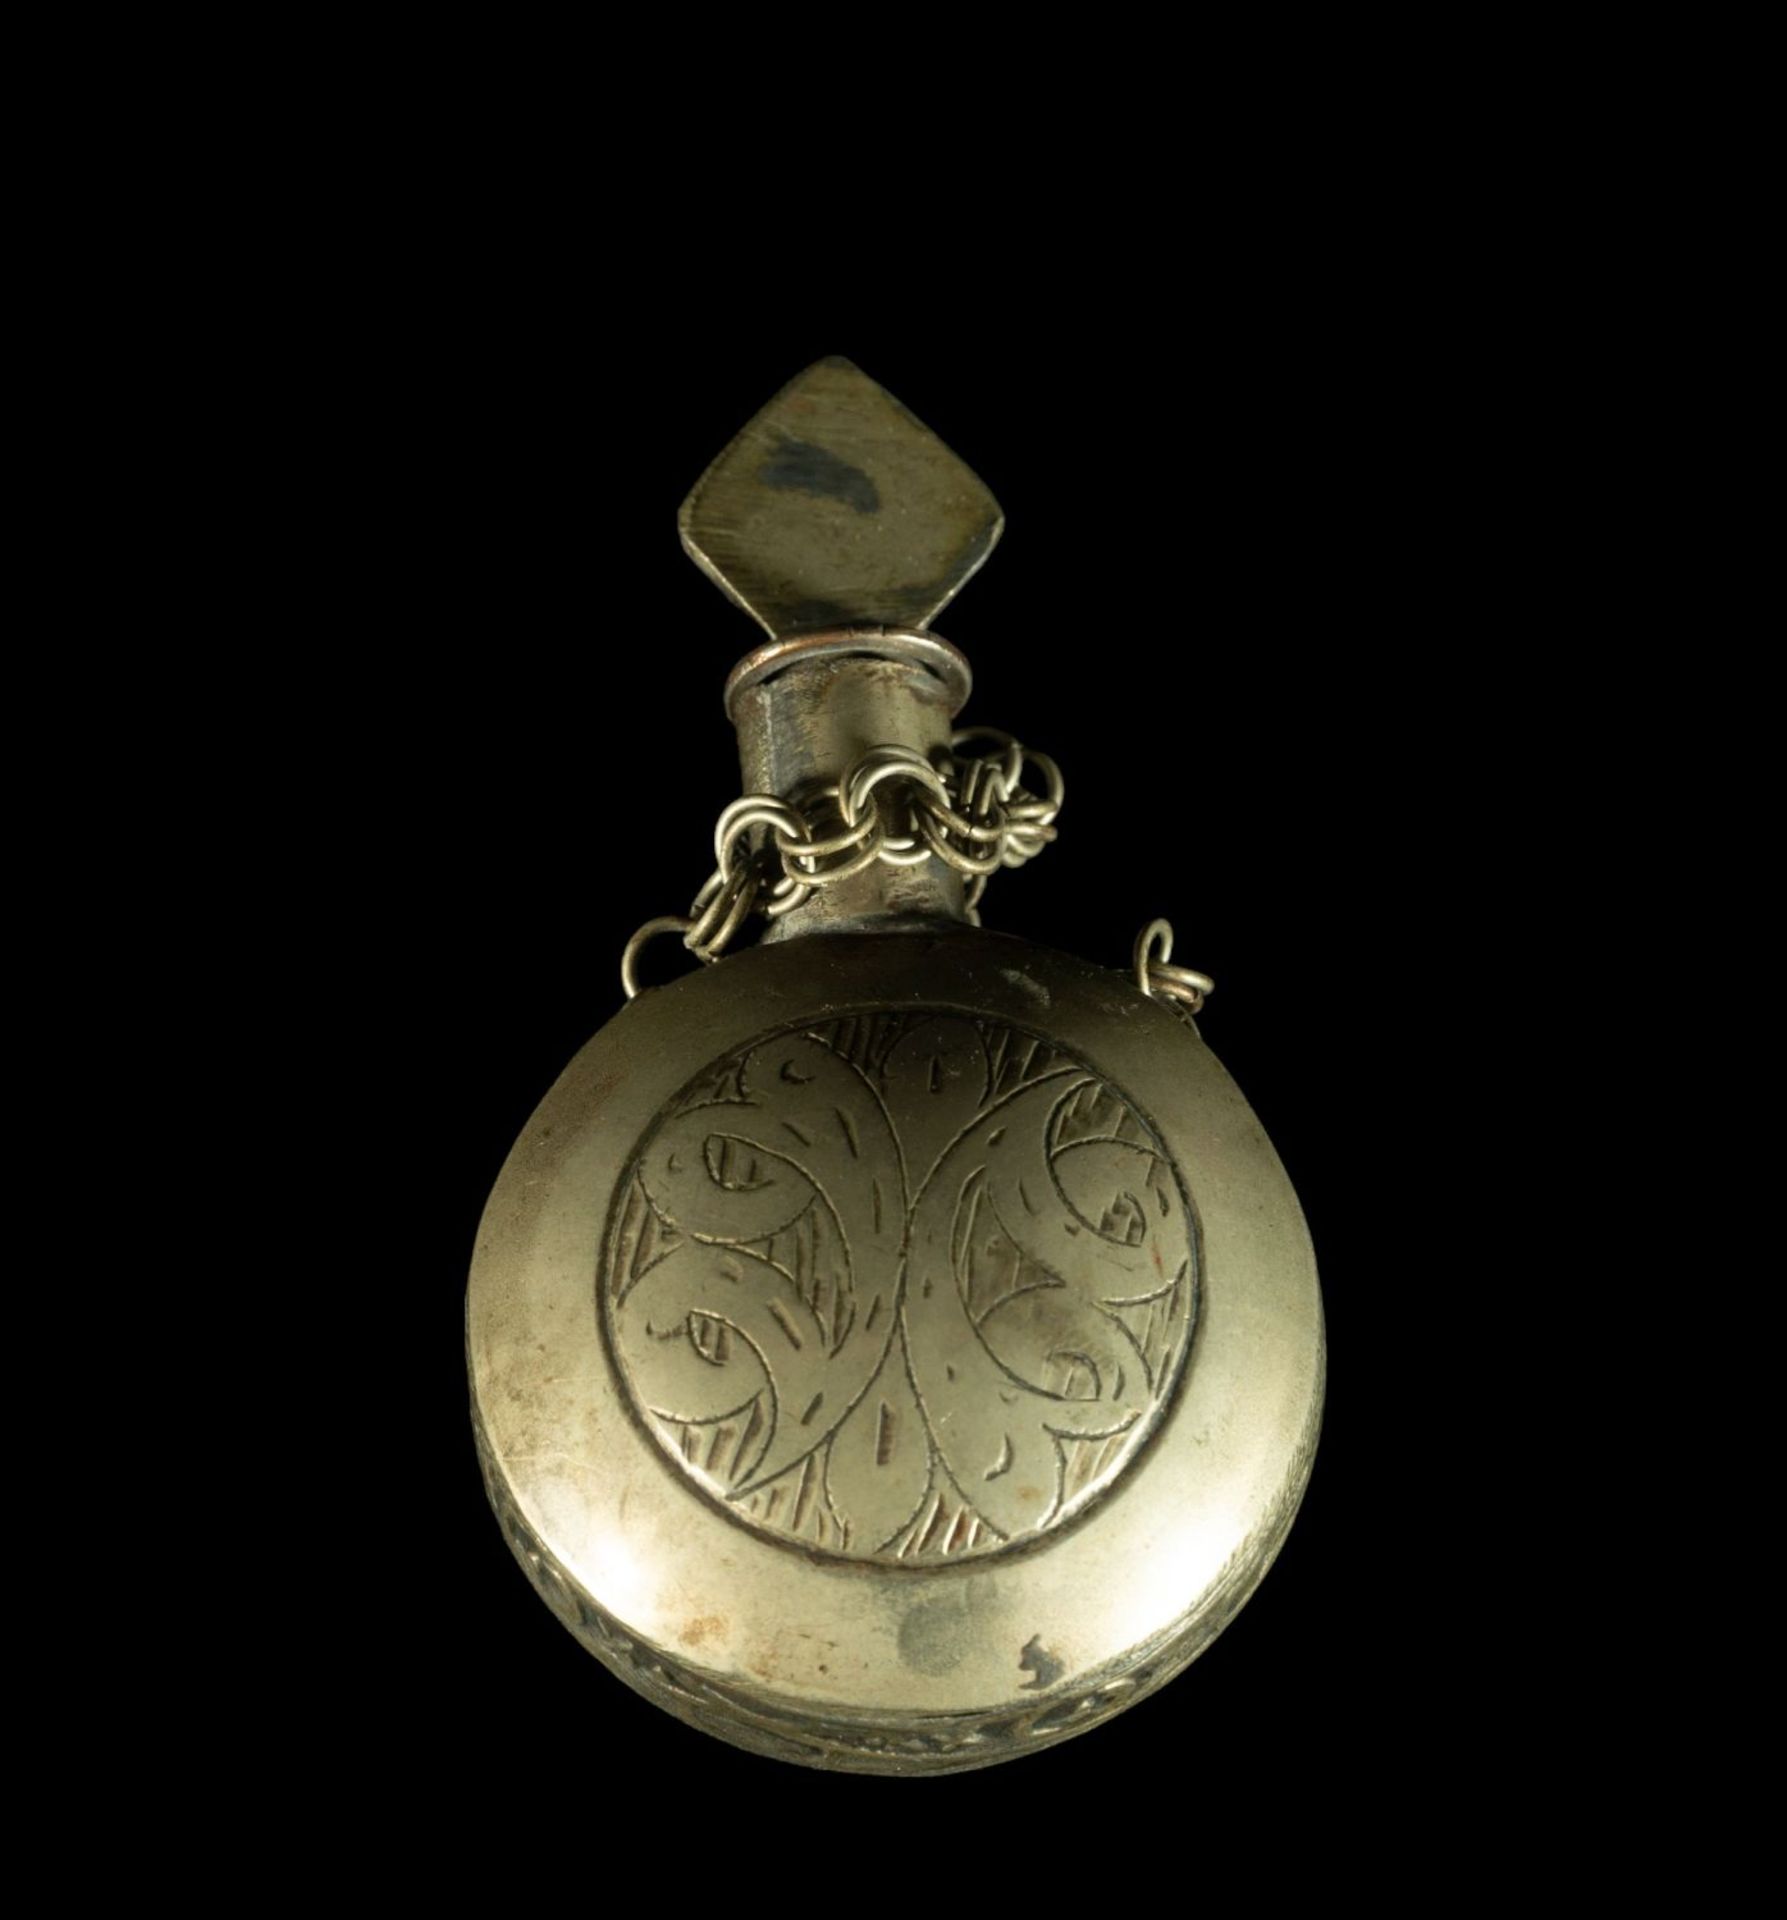 Container for extreme anointing in silver metal, Mexico, 19th century - Image 2 of 2